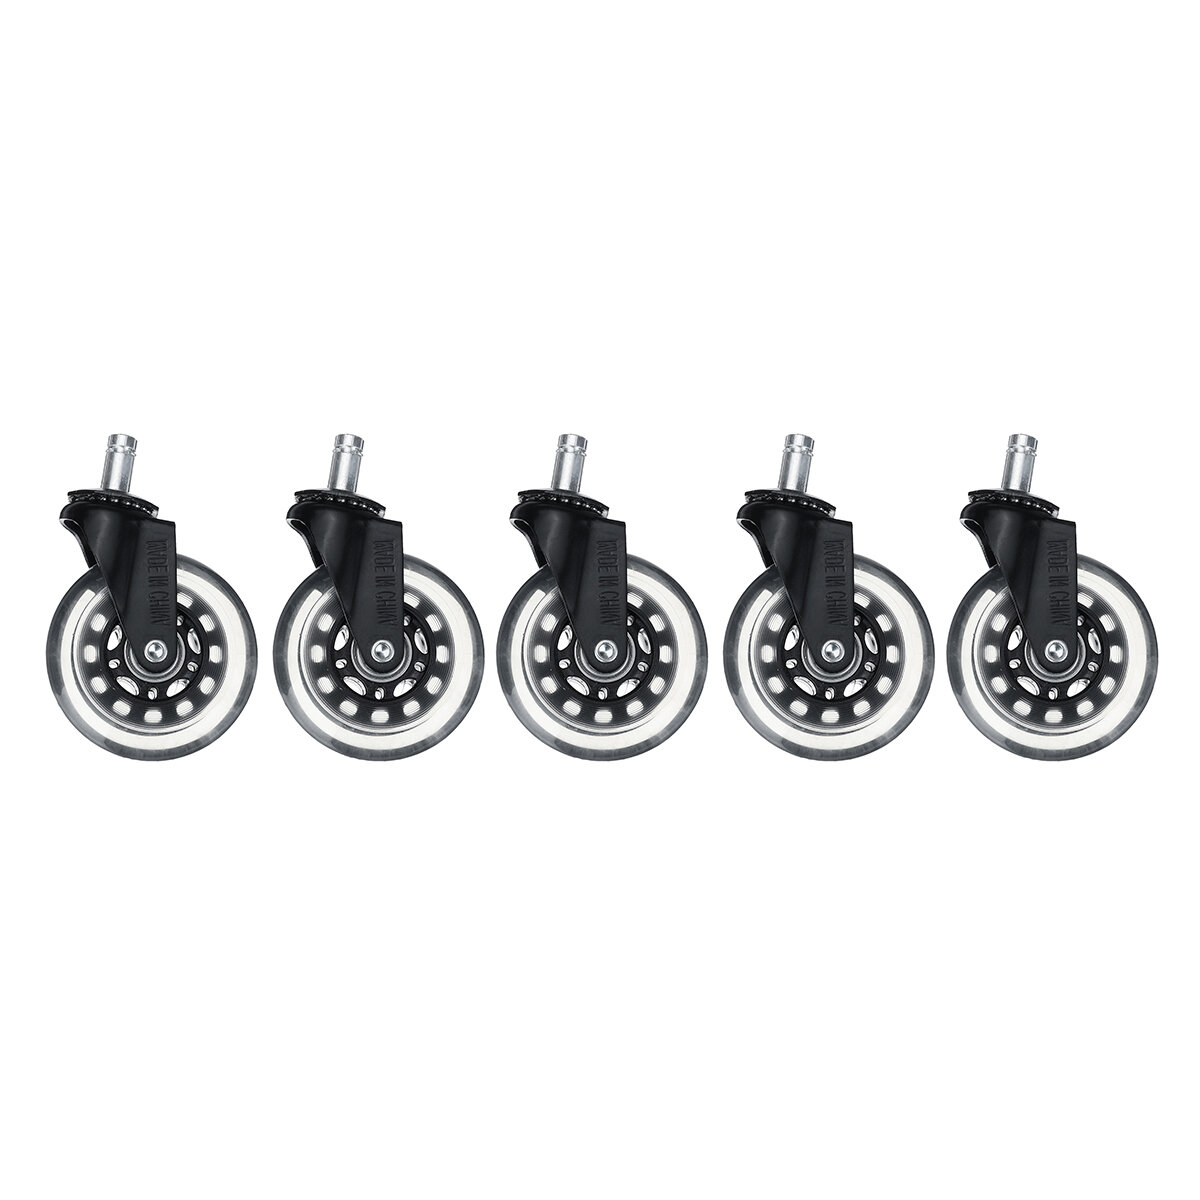 

5Pcs Office Chair Caster Wheels 3 Inch Replacement Swivel Rubber Caster Wheels Soft Safe Rollers Furniture Hardware Acce